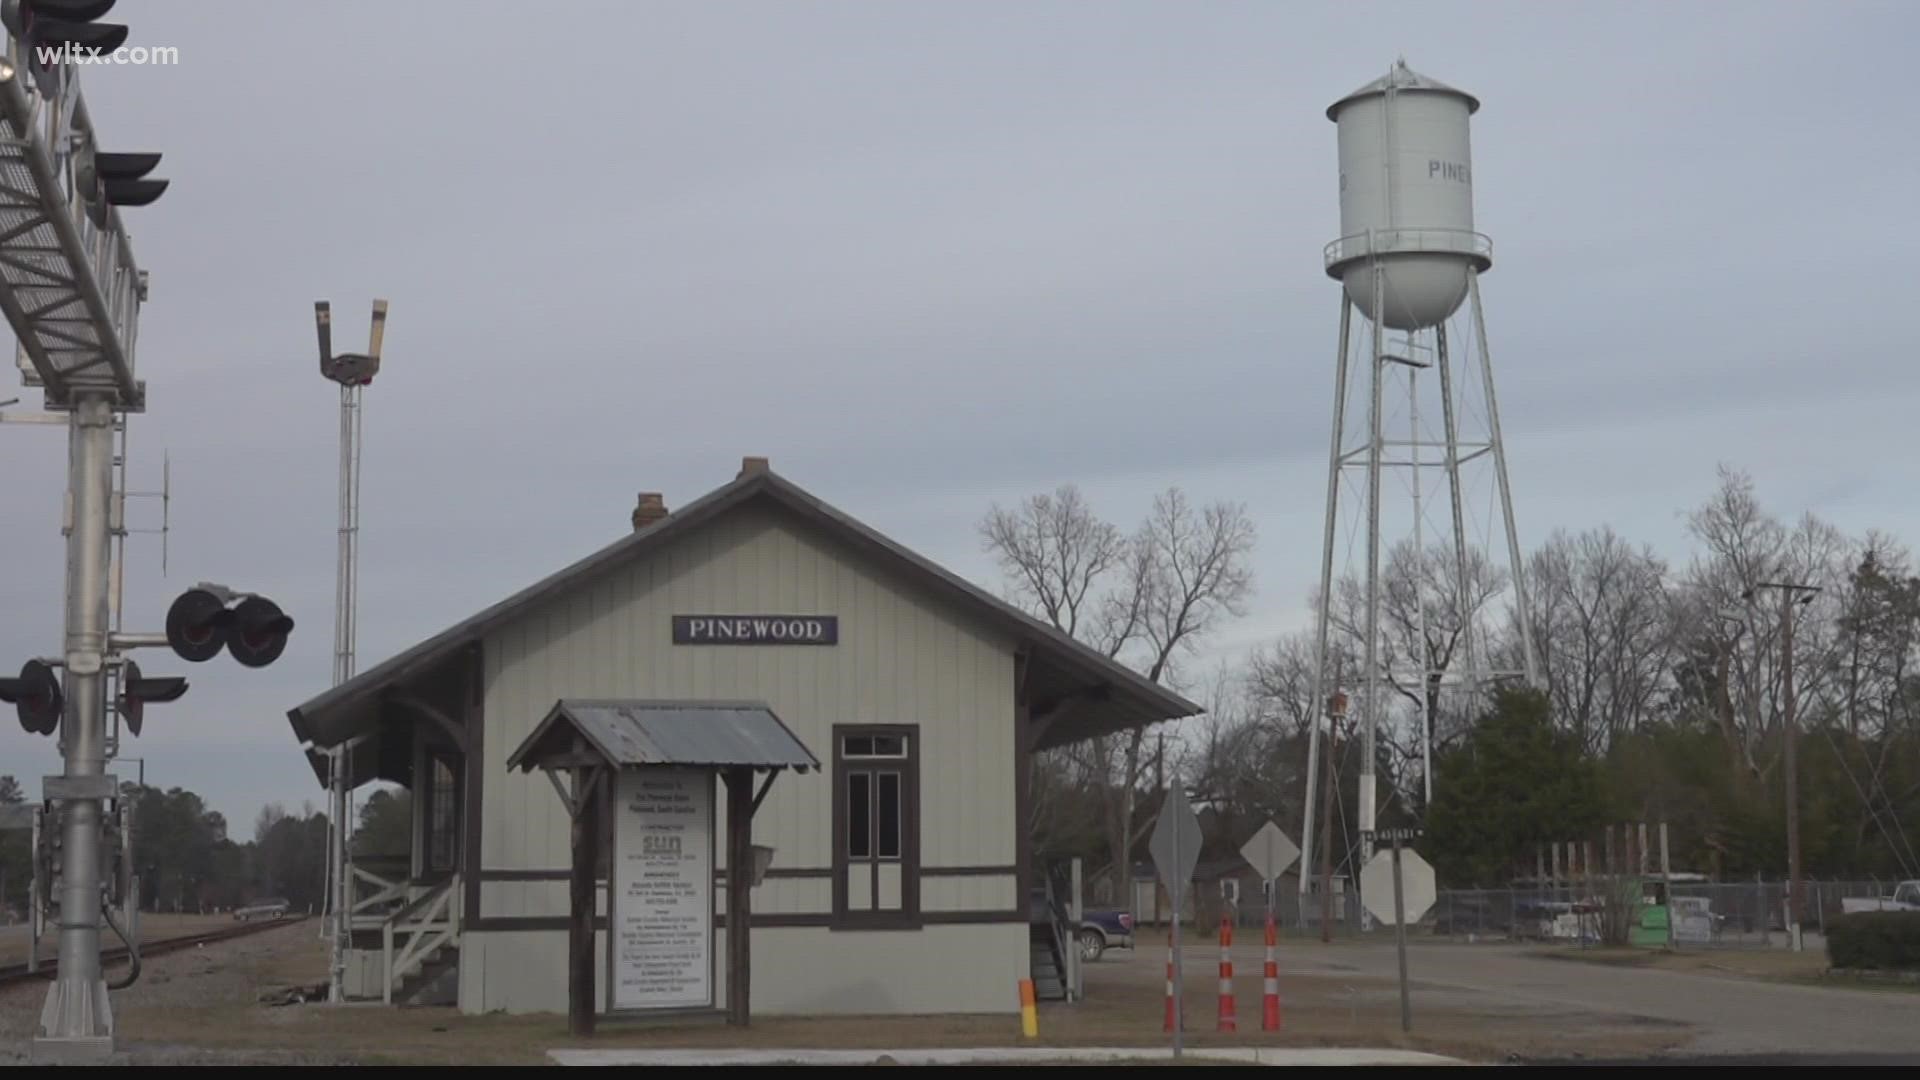 There are efforts in Sumter County to get more people to downtown Pinewood. That's the goal of renovations to the Town Depot.